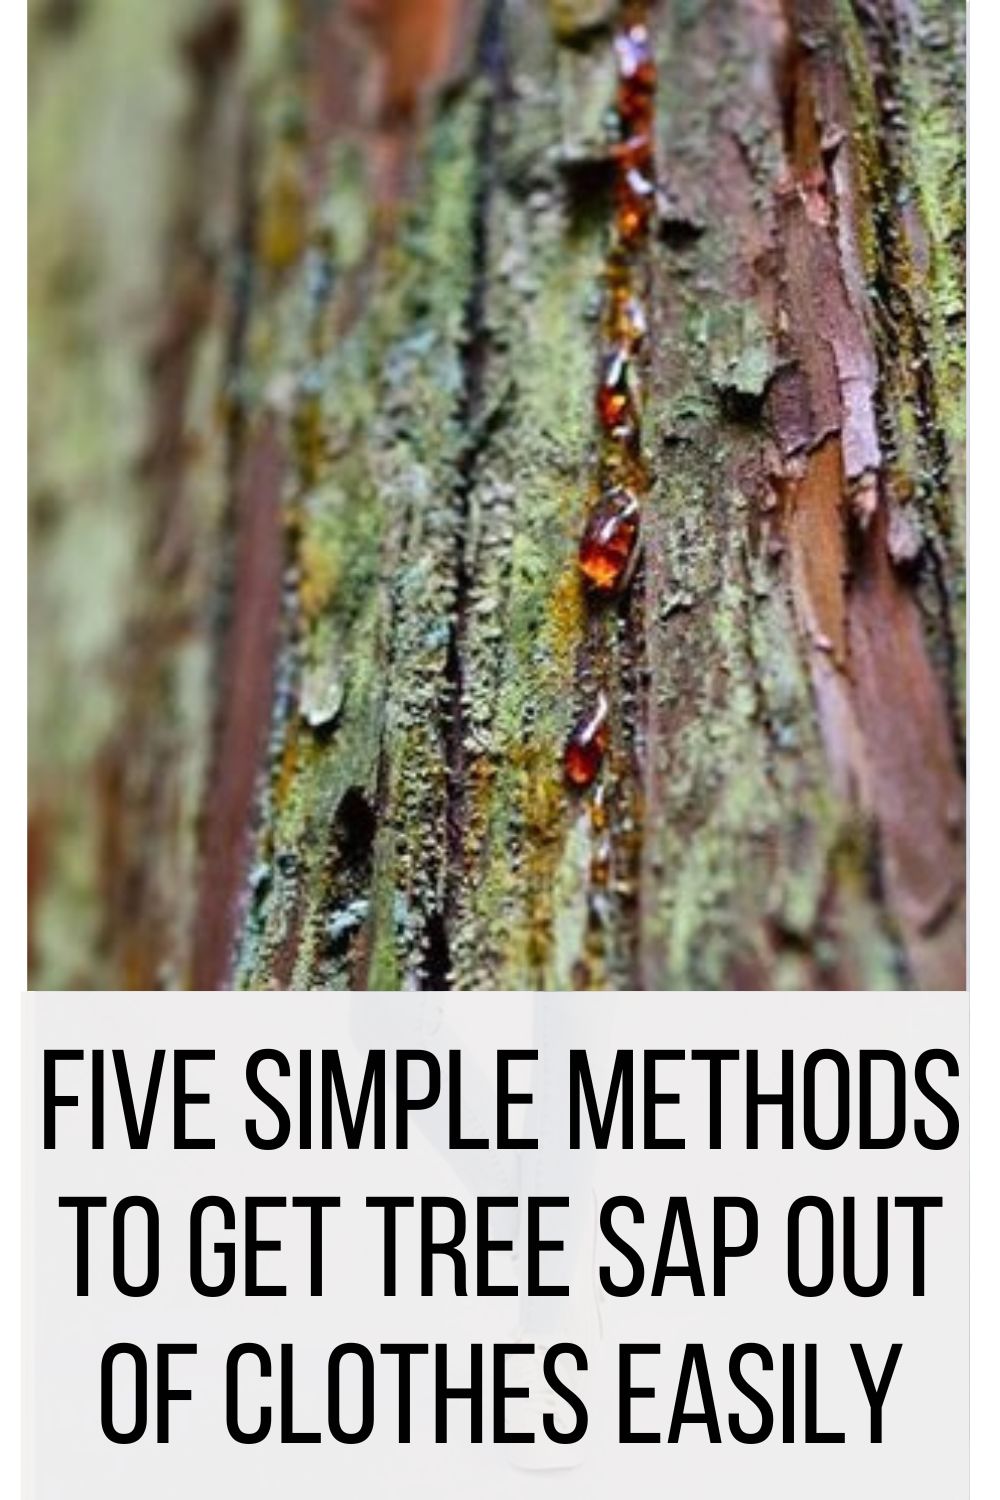 Five Simple Methods to Get Tree Sap Out of Clothes Easily